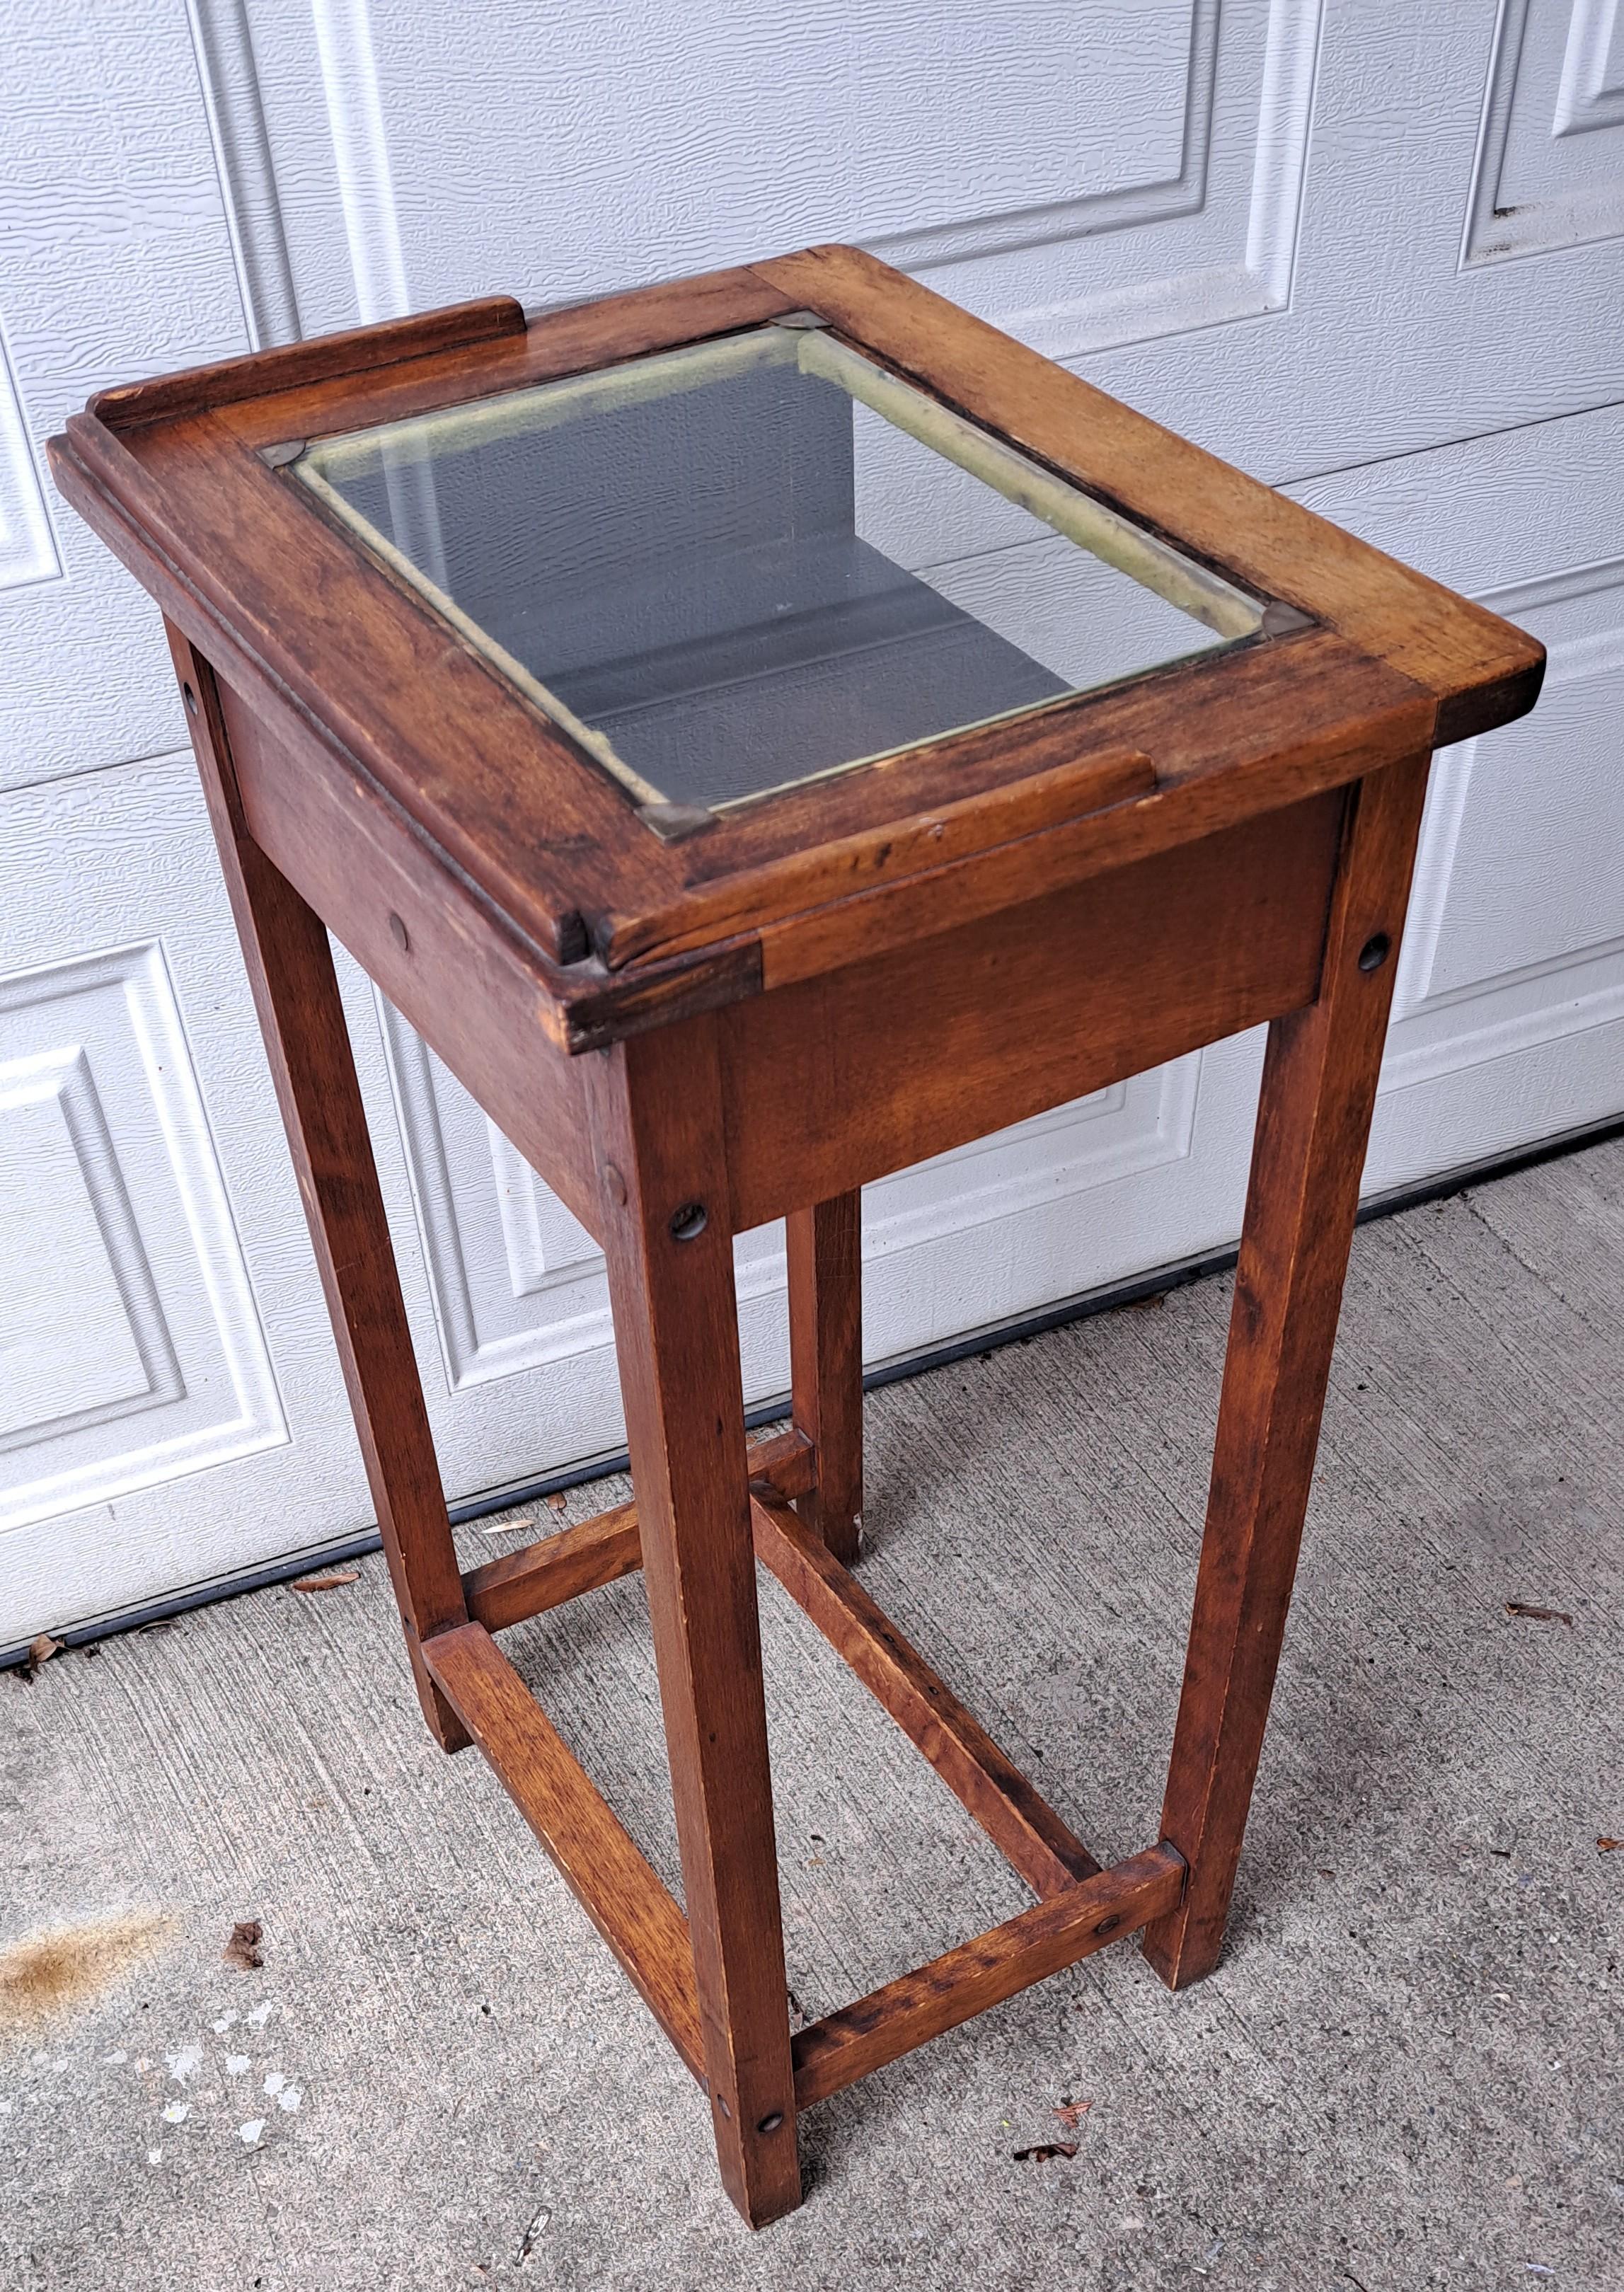 Antique authentic wooden wash stand. Top has three sided ledge and glass insert with brass corners. Original wood has a fine patina.